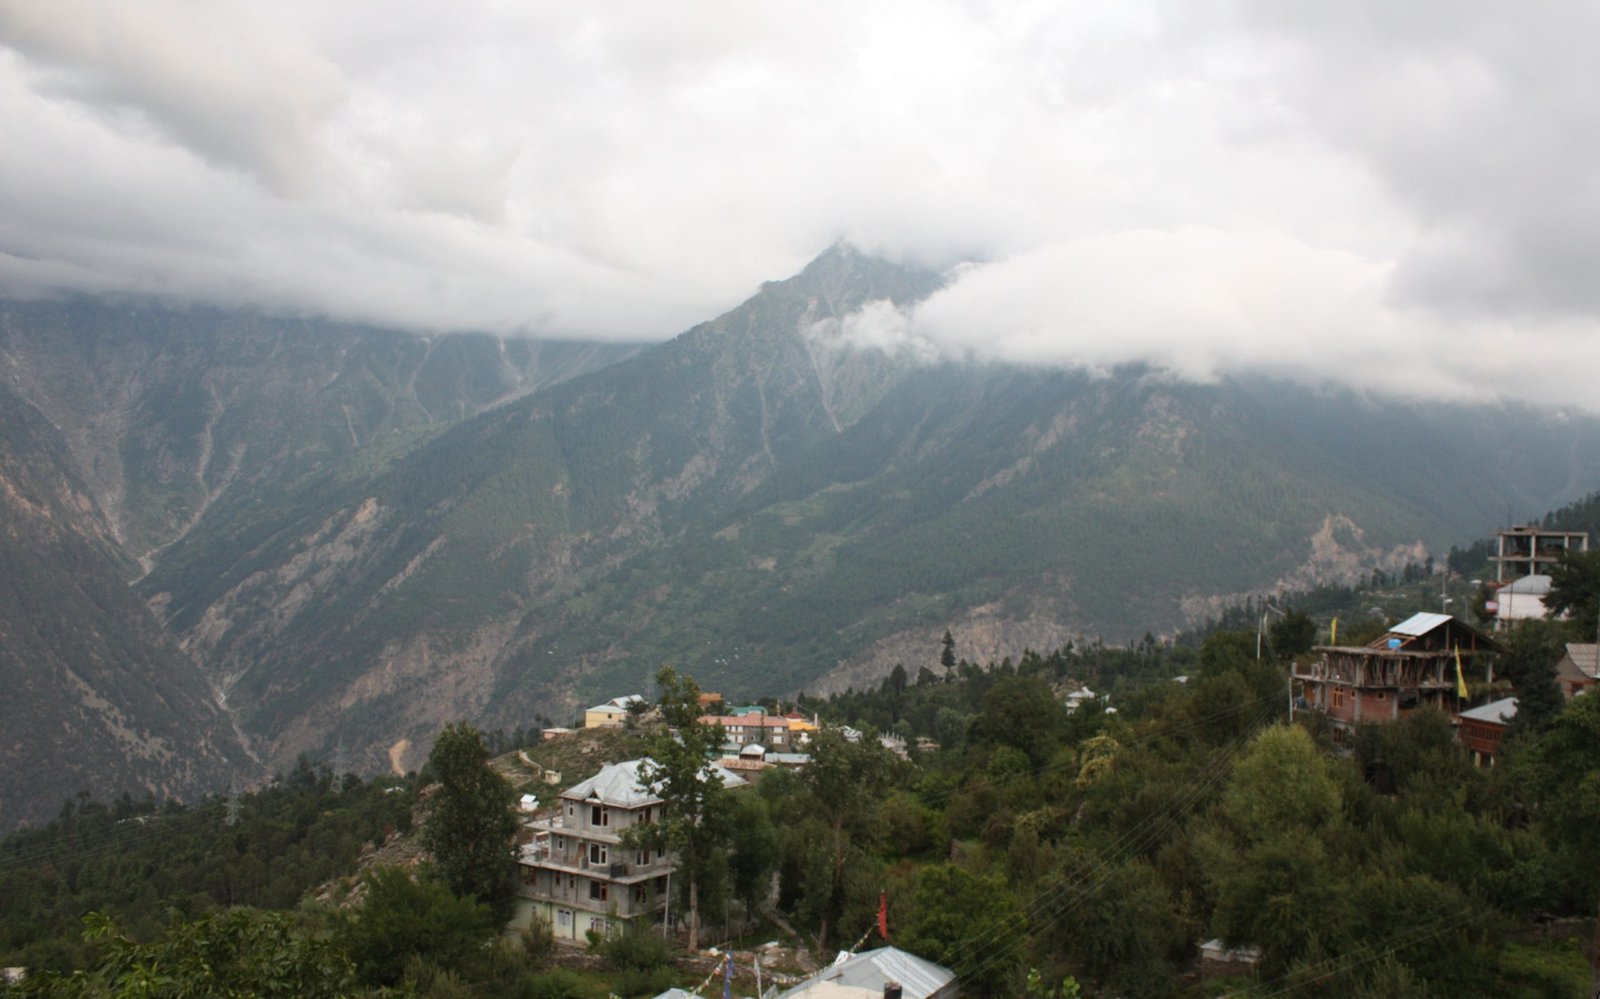 Kalpa is one of the most beautiful new hill stations of India